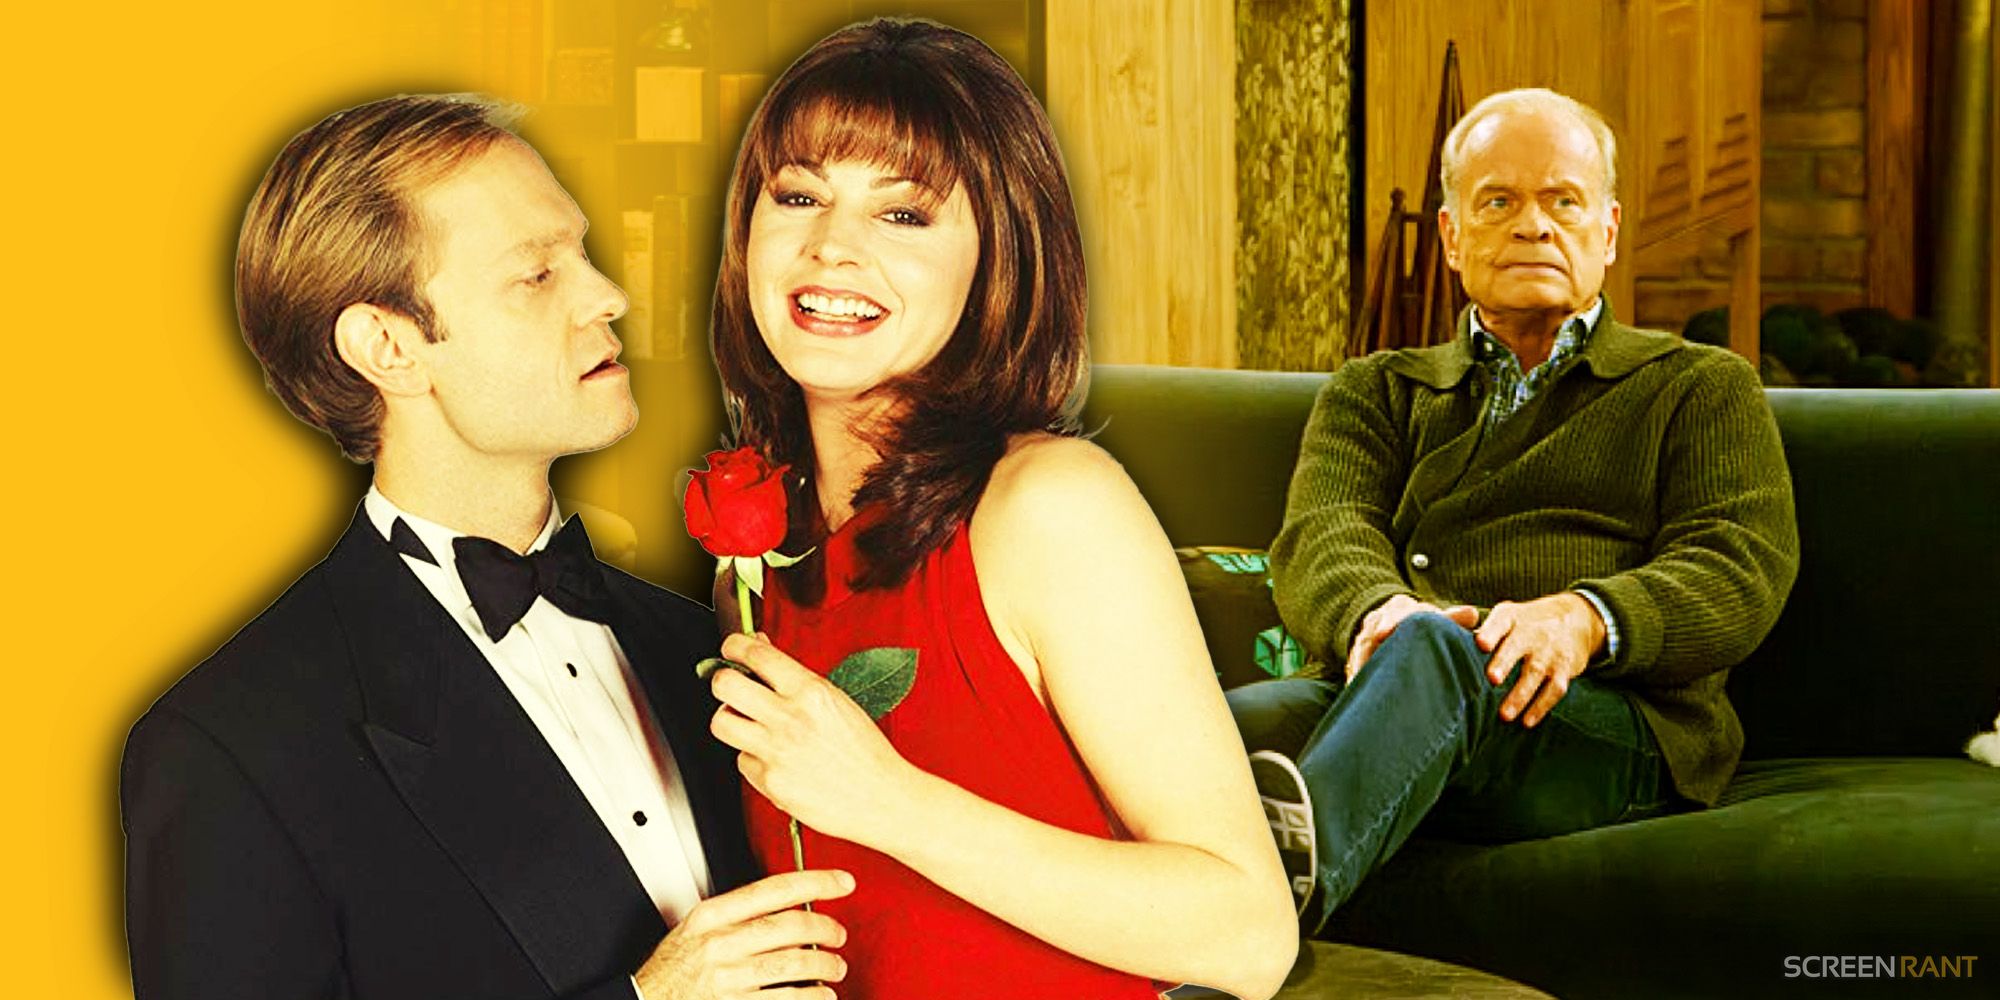 Niles and Daphne with Frasier